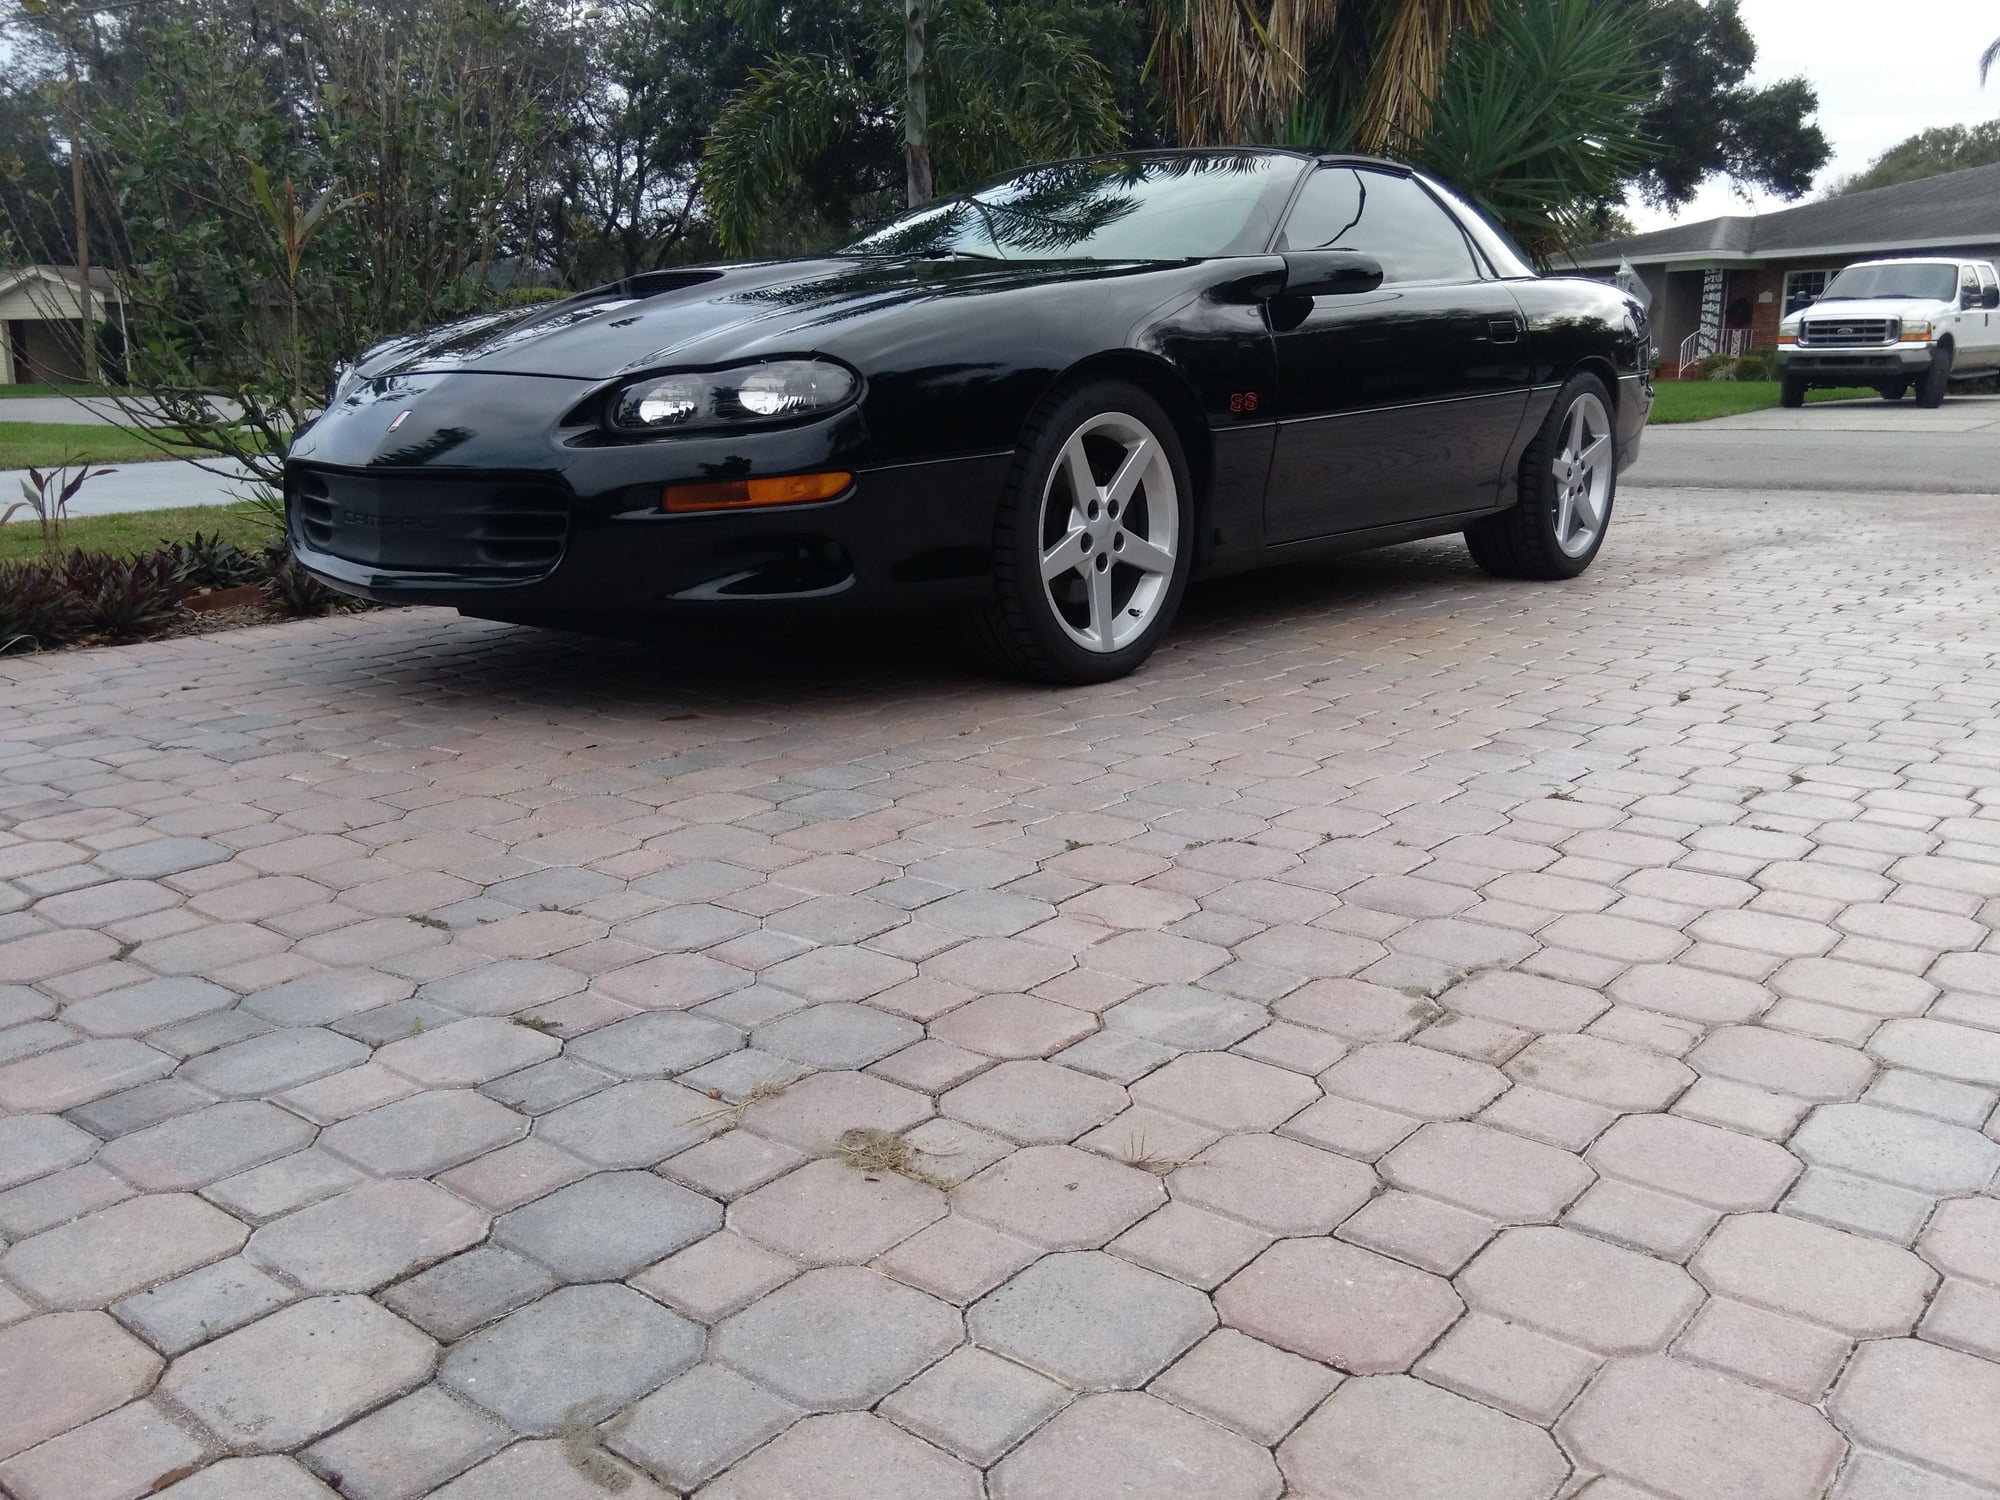 1999 Chevrolet Camaro - 1999 Camaro SS 6spd - Used - VIN ou8125643k55 - 144,000 Miles - 8 cyl - 2WD - Manual - Coupe - Black - Central, FL 33881, United States